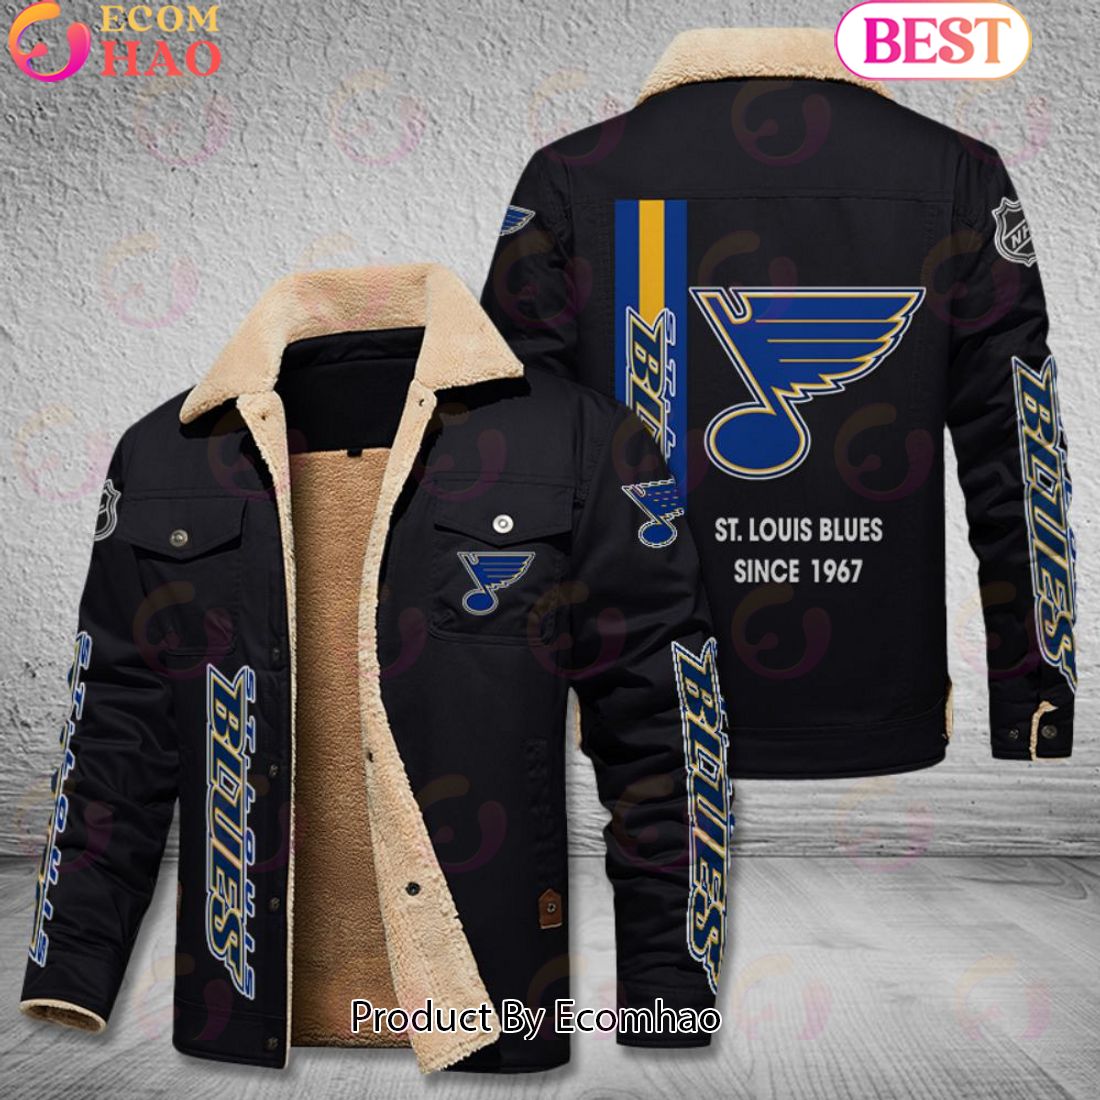 NHL St Louis Blues Since 1967 Leather Jacket - Ecomhao Store